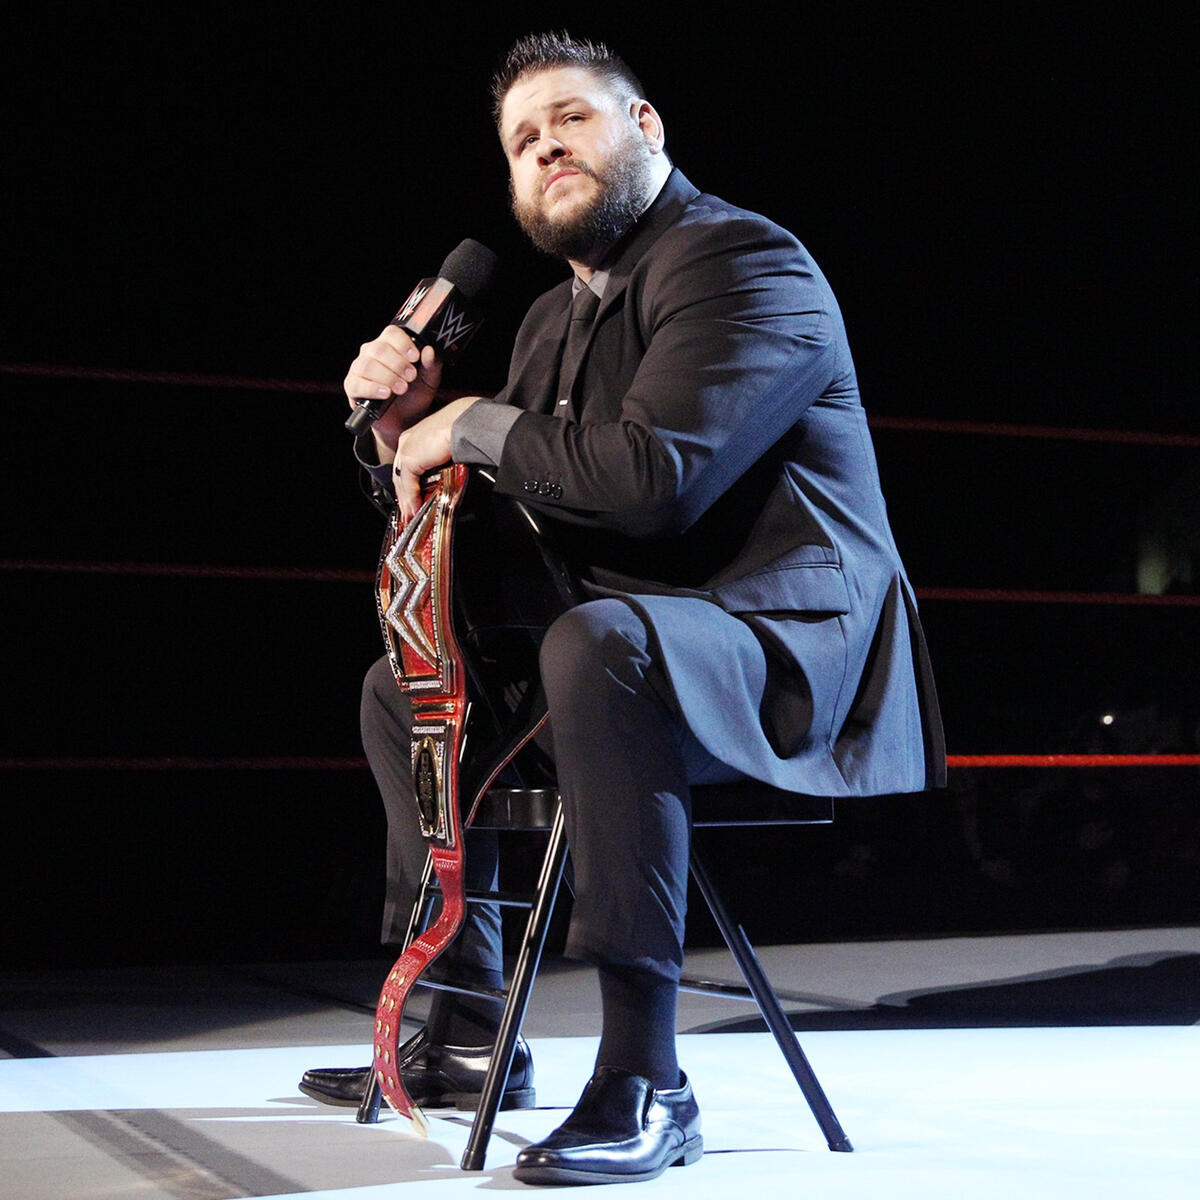 After viciously betraying his former best friend, Chris Jericho, last week on Raw, WWE Universal Champion Kevin Owens says he is ready to answer the question that is on everyone’s mind.